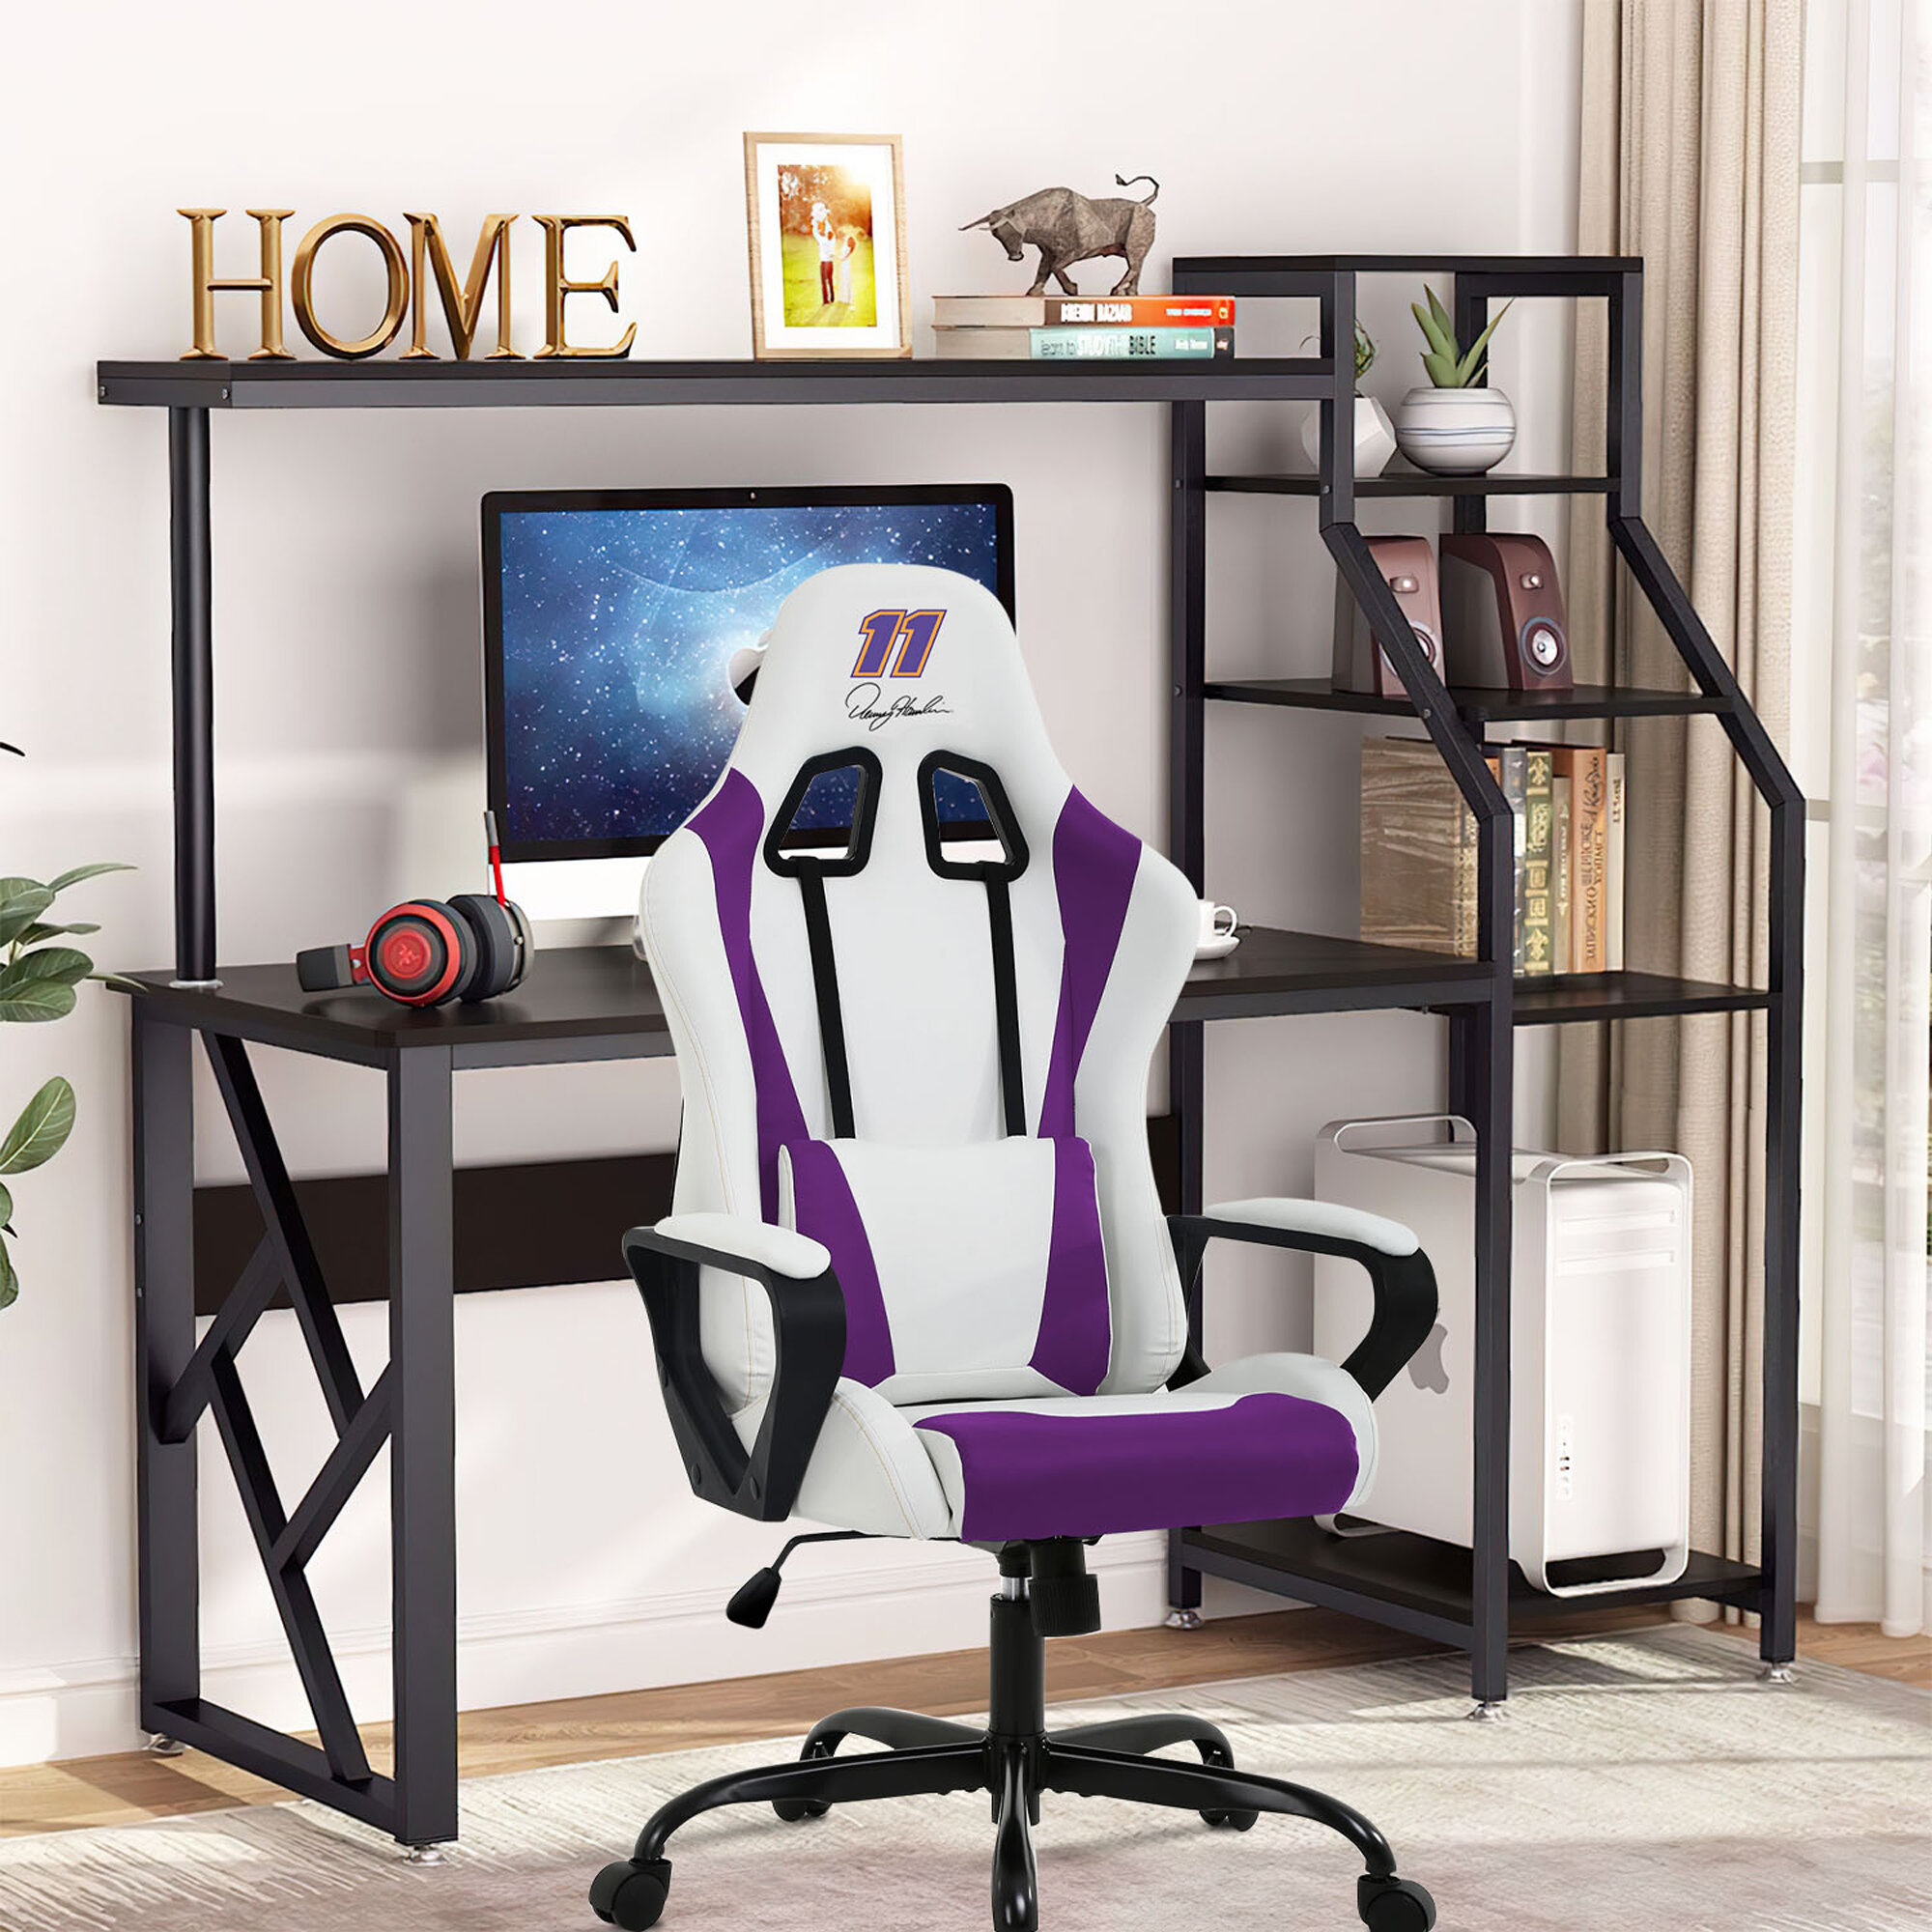 PC Gaming Chair Office Chair Ergonomic Computer Desk Chair Adjustable PU Leather 